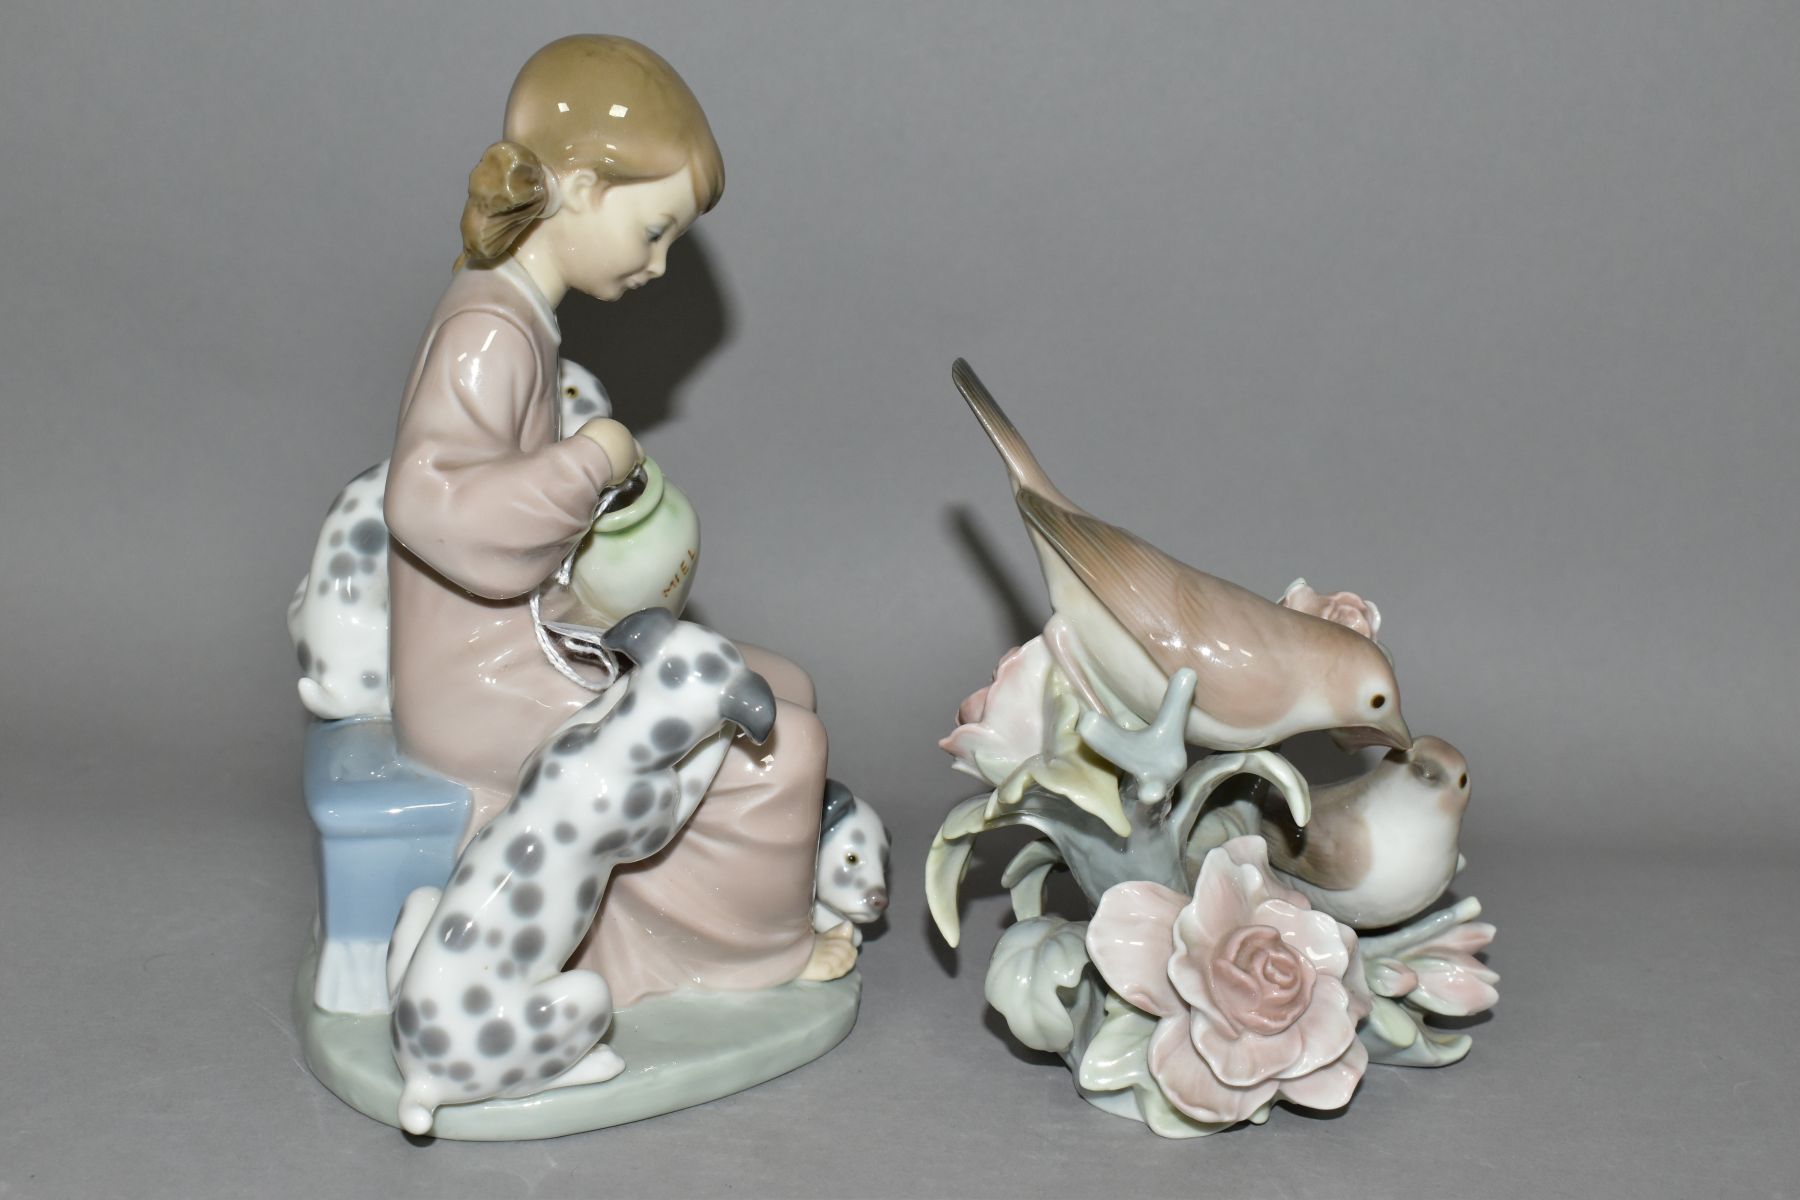 A LLADRO SCULPTURE 'THE SWEET MOUTHED' No 1248, designed by Juan Heurta in 1974, retired 1990, - Image 2 of 9